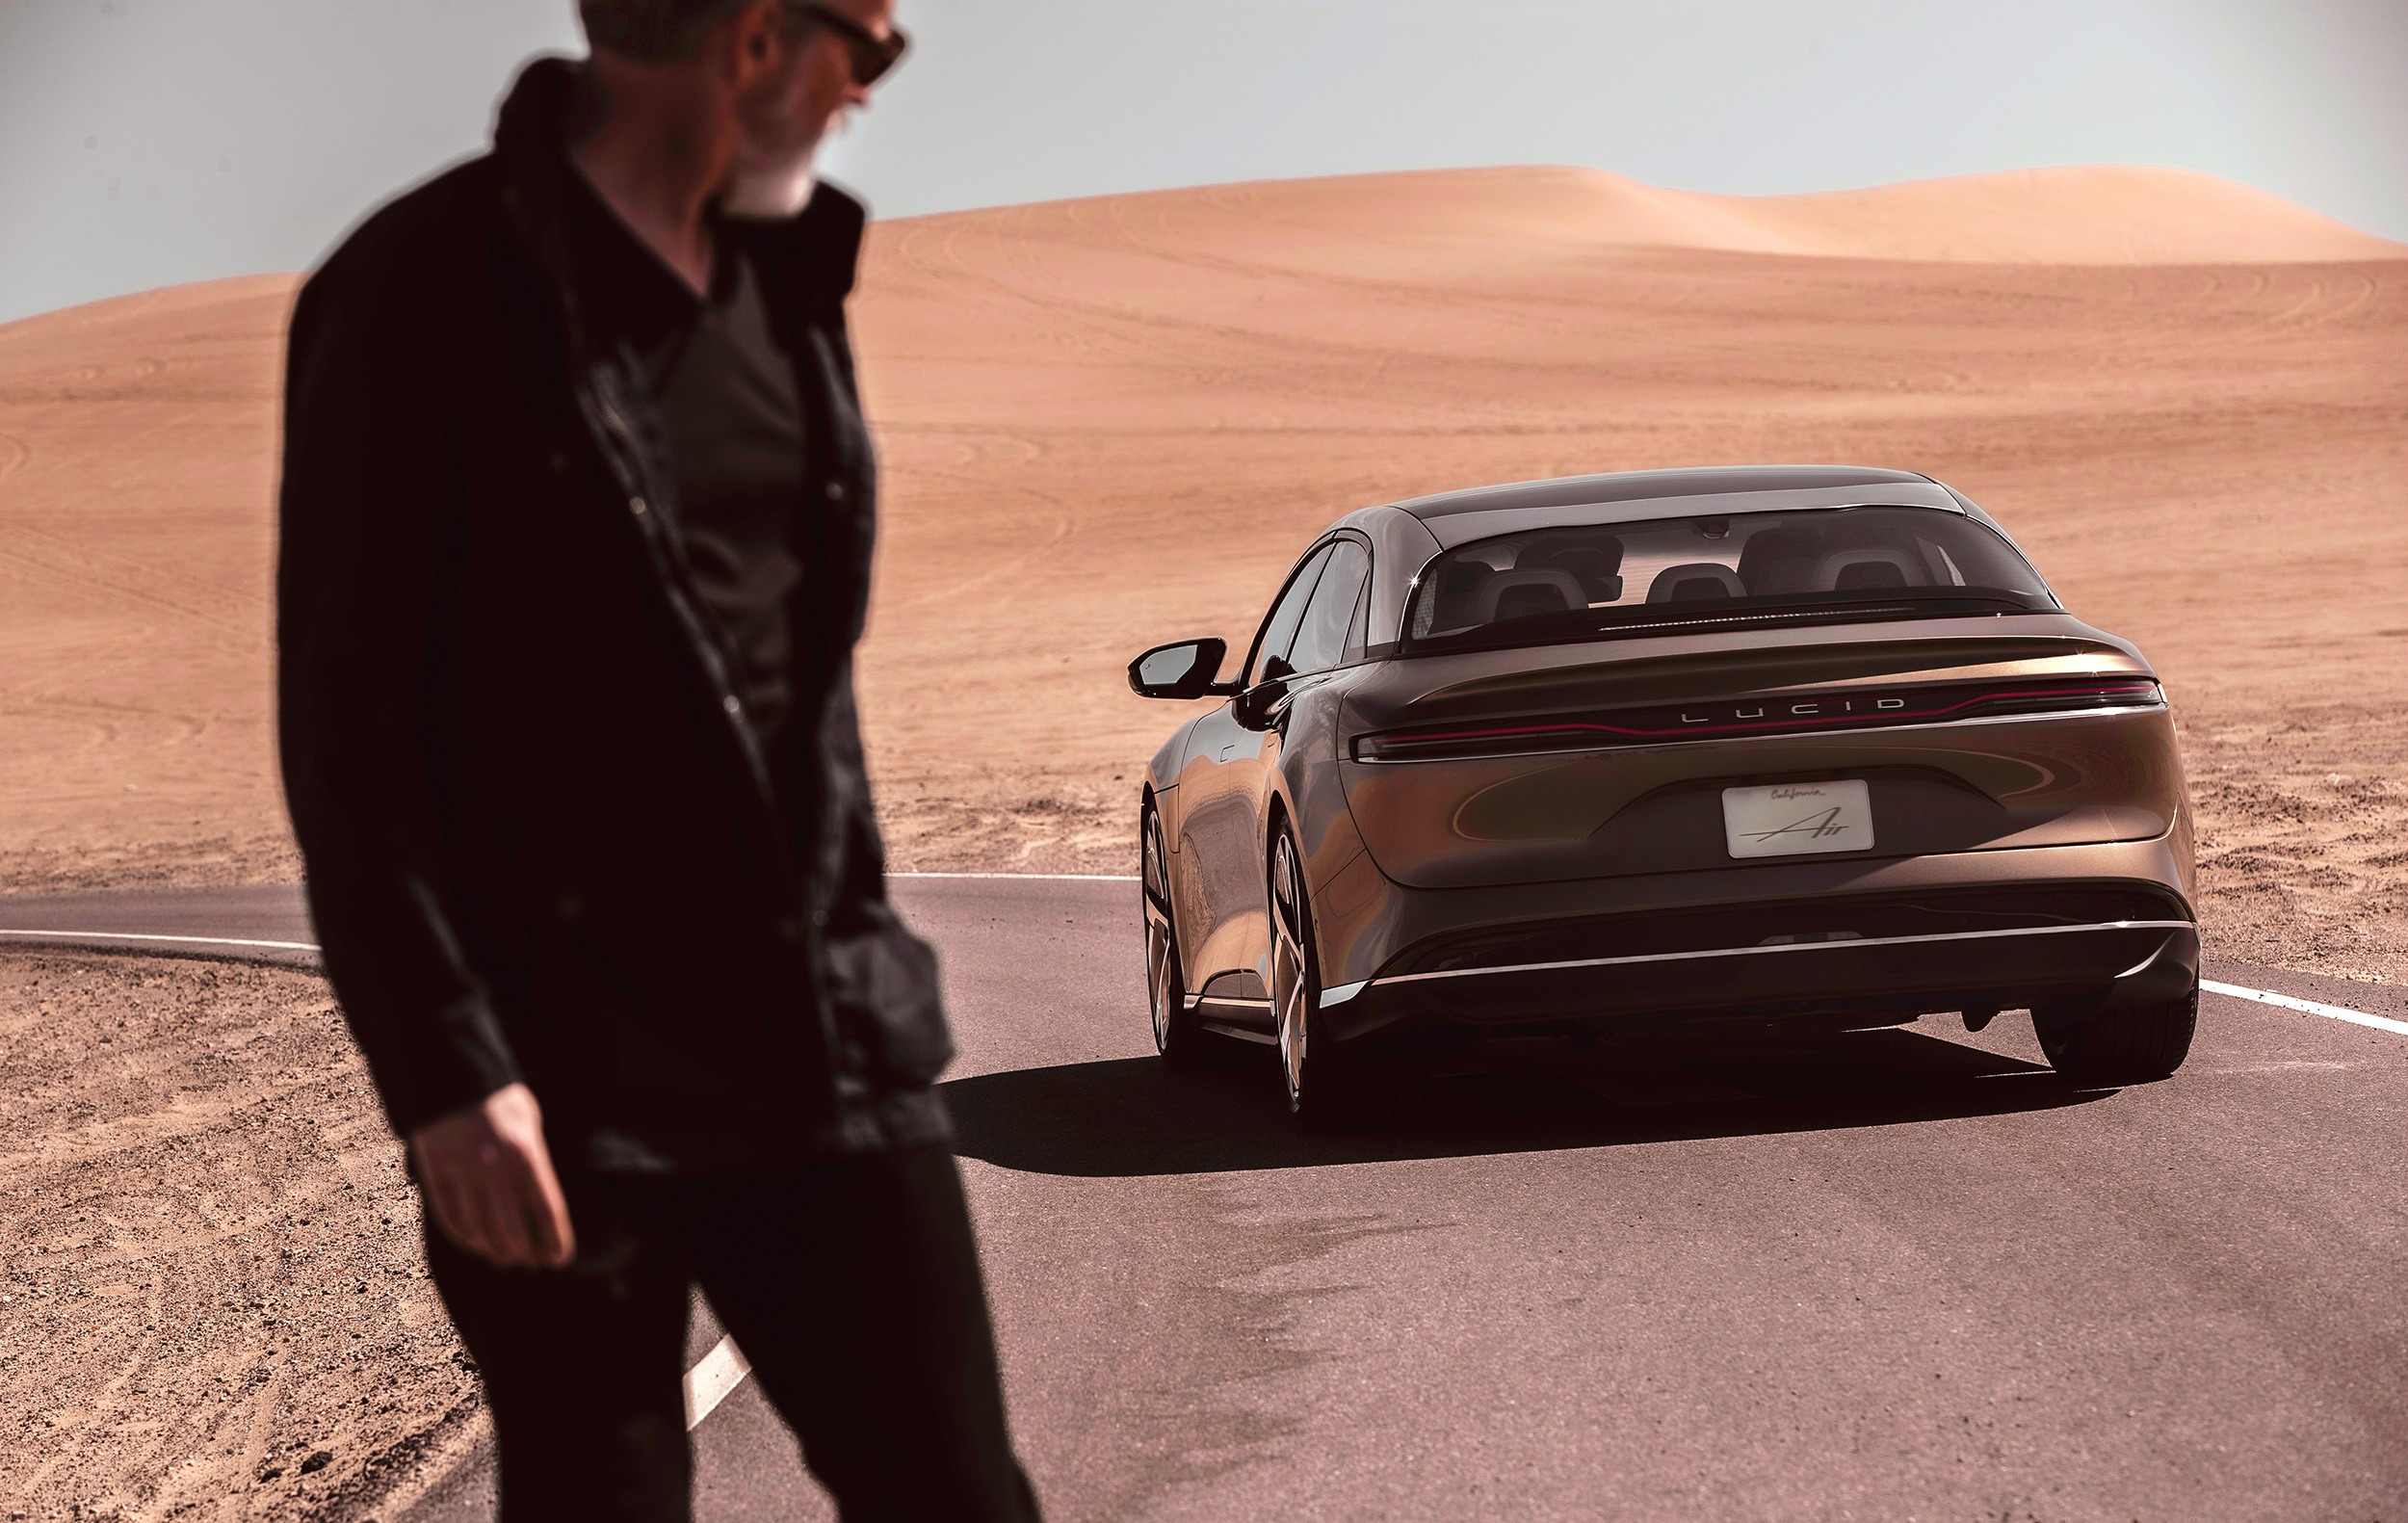 Reviews From Real Lucid Air Owners – The Good & Bad